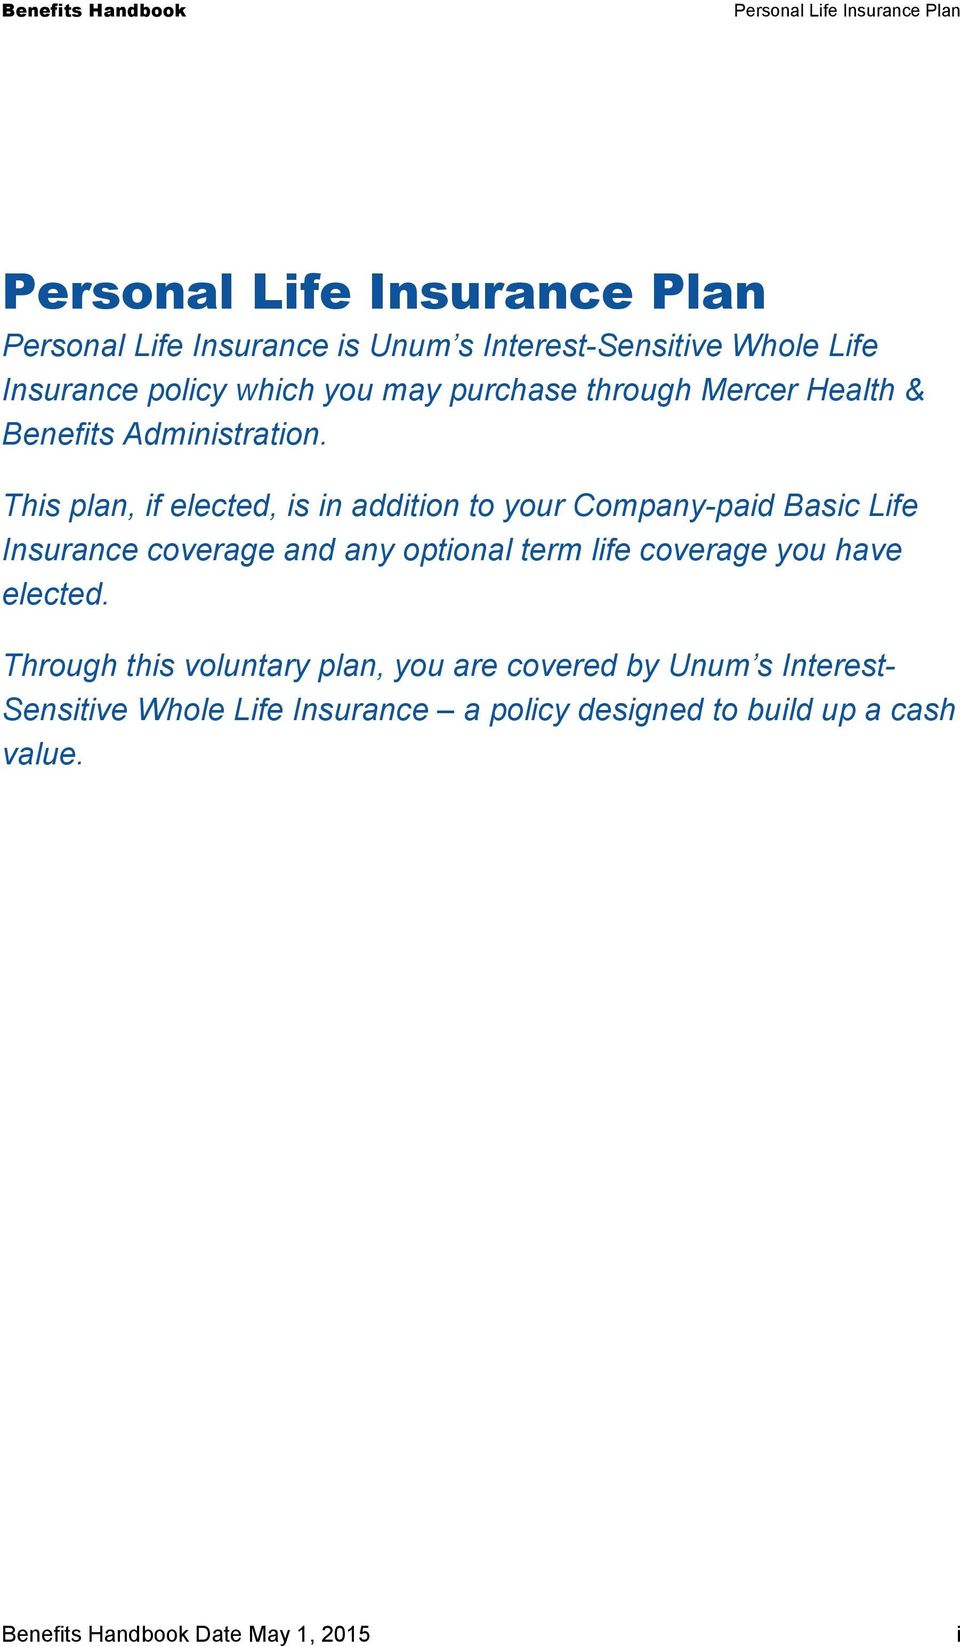 This plan, if elected, is in addition to your Company-paid Basic Life Insurance coverage and any optional term life